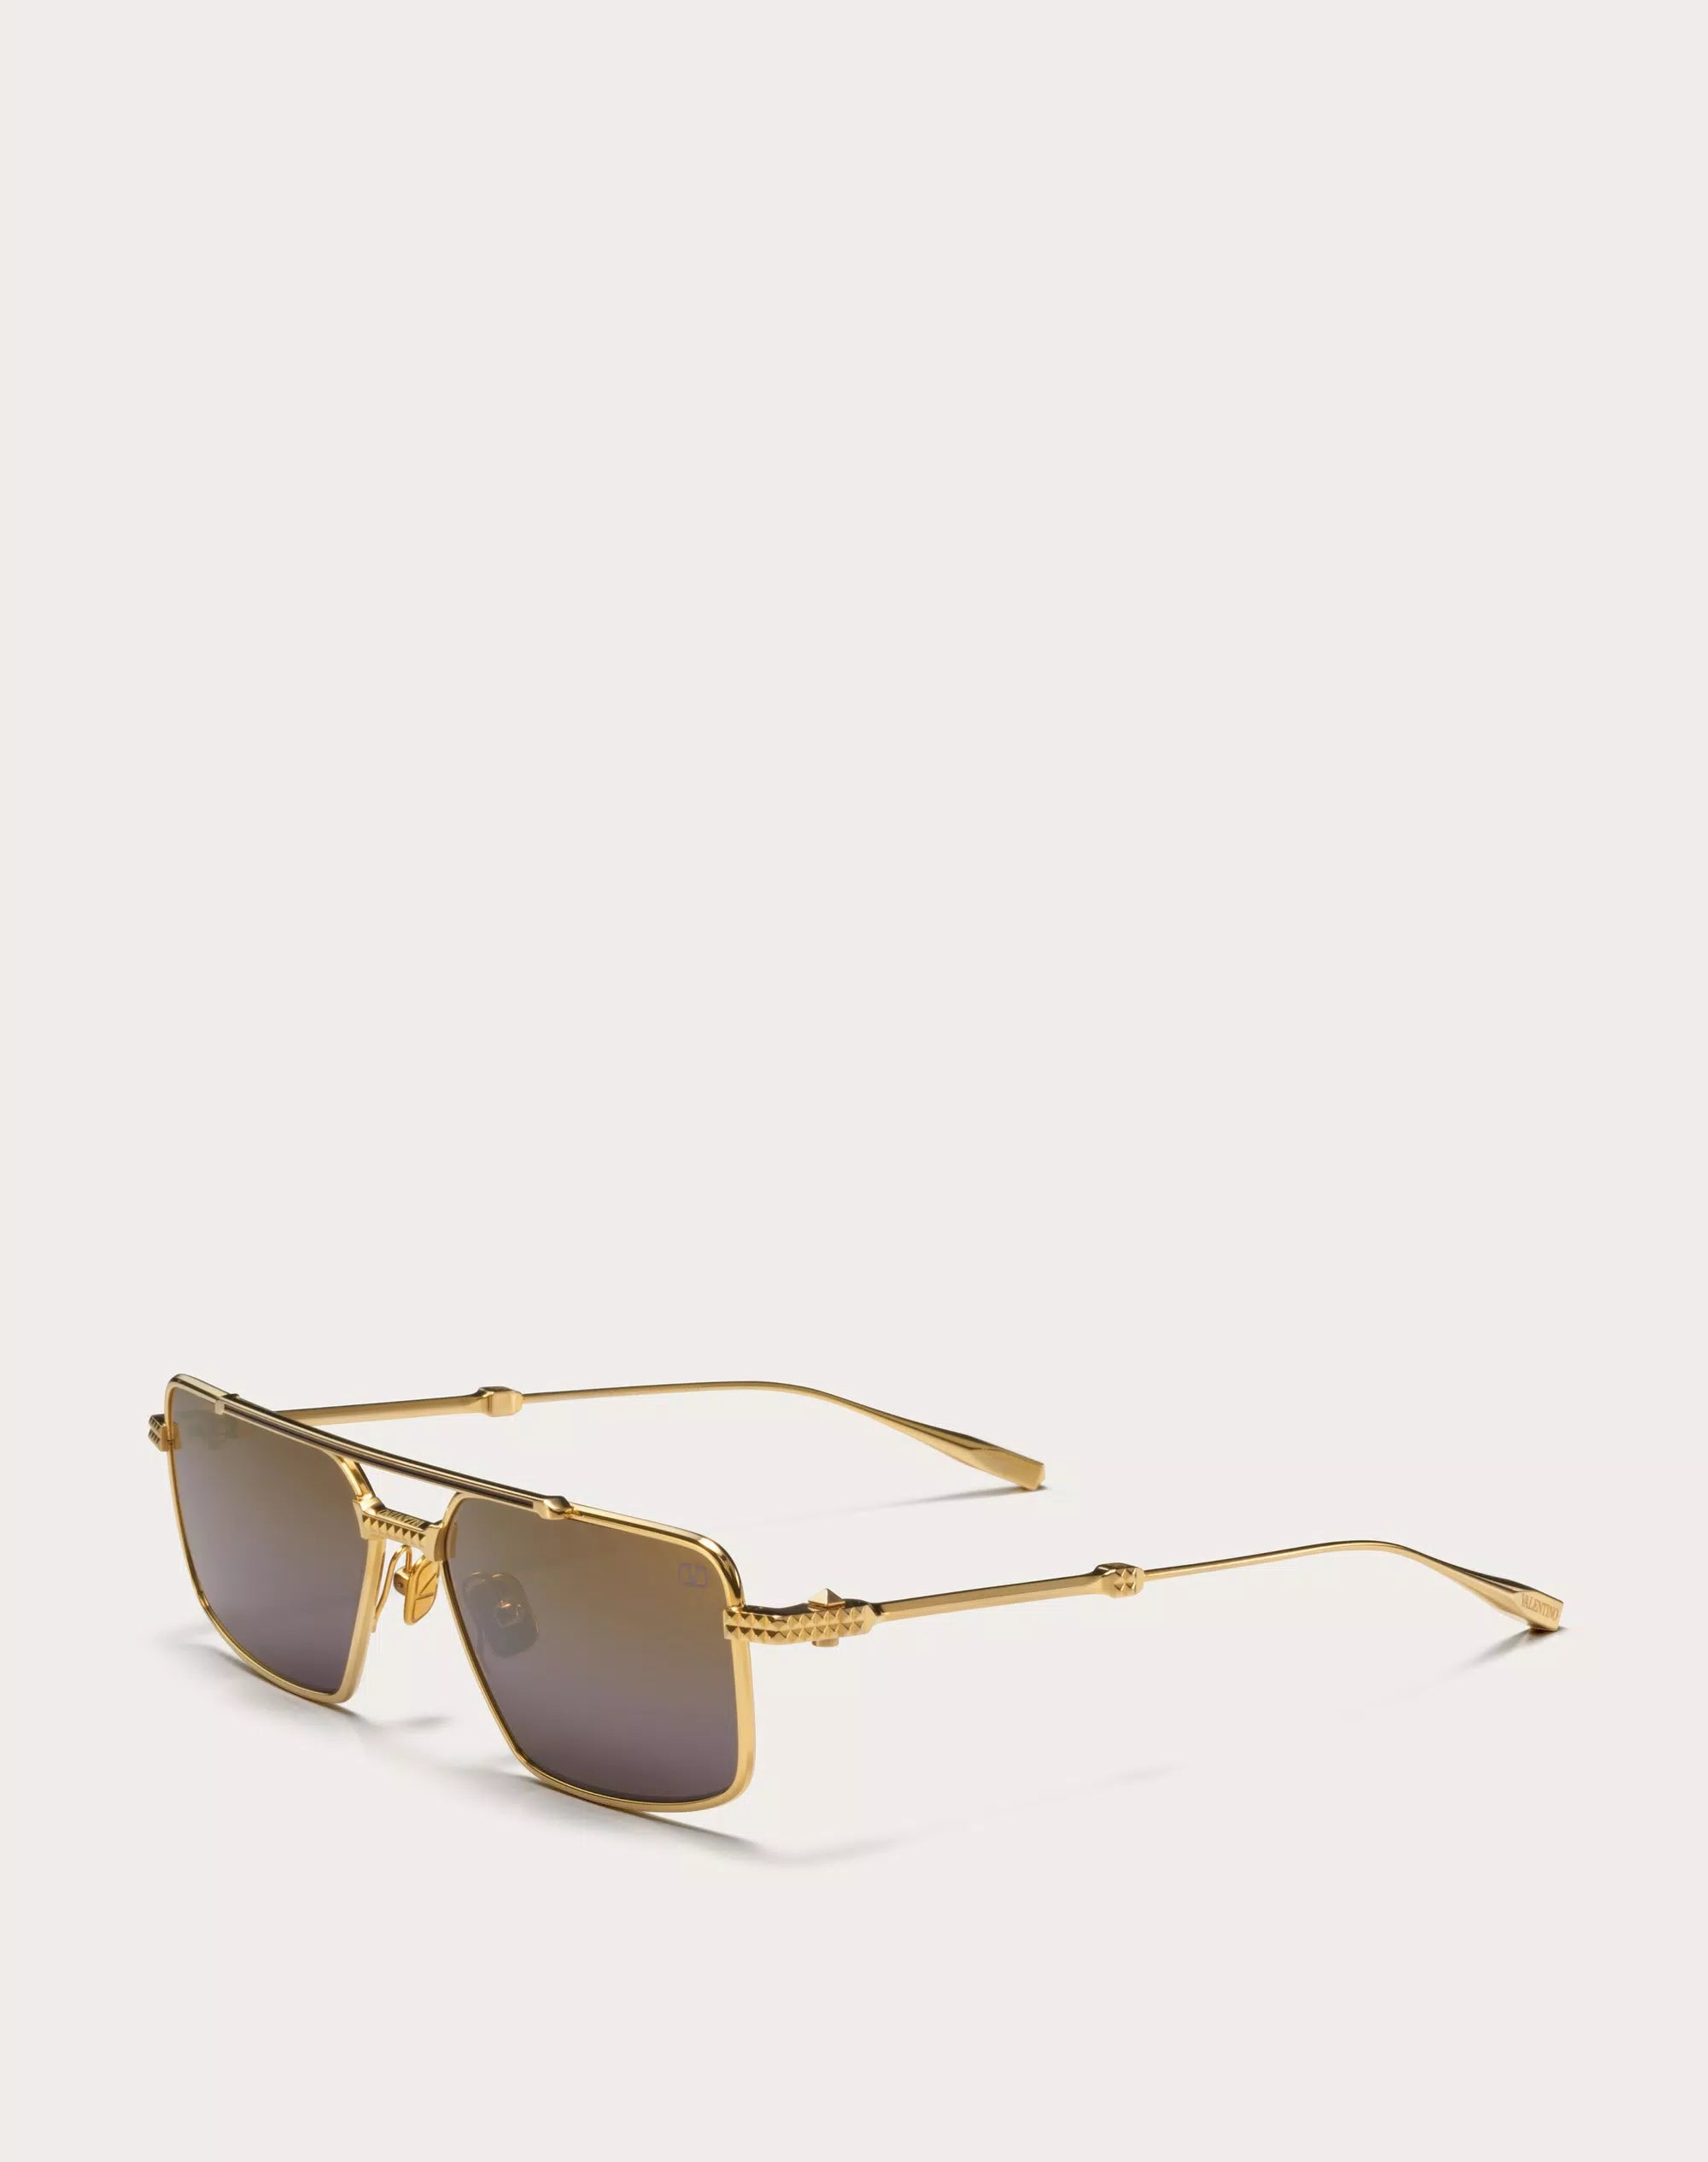 Charles & Keith Women's Open Wire Square Sunglasses